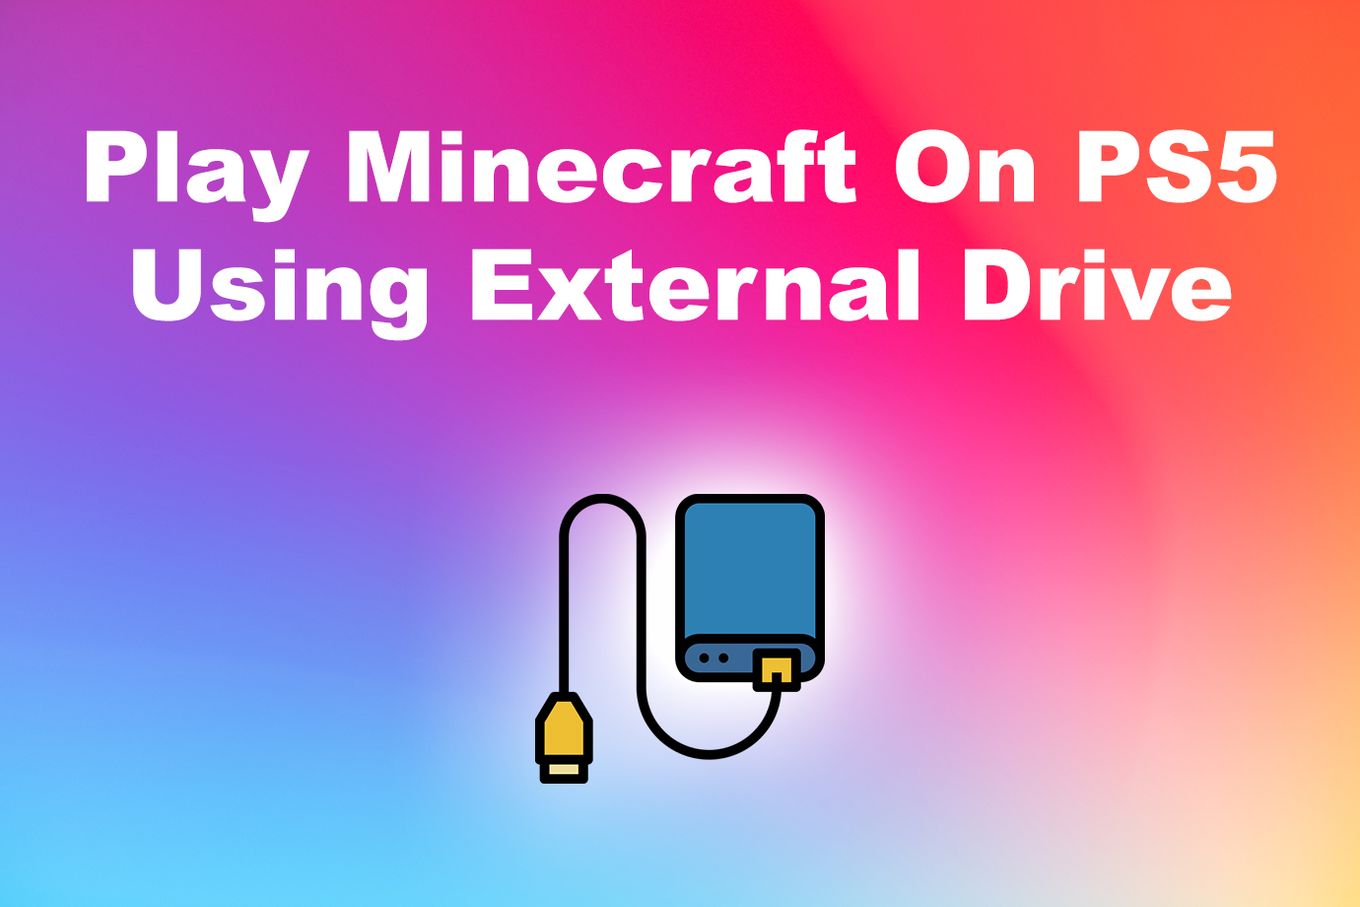 Play Minecraft on PS5 Using Externa Drive